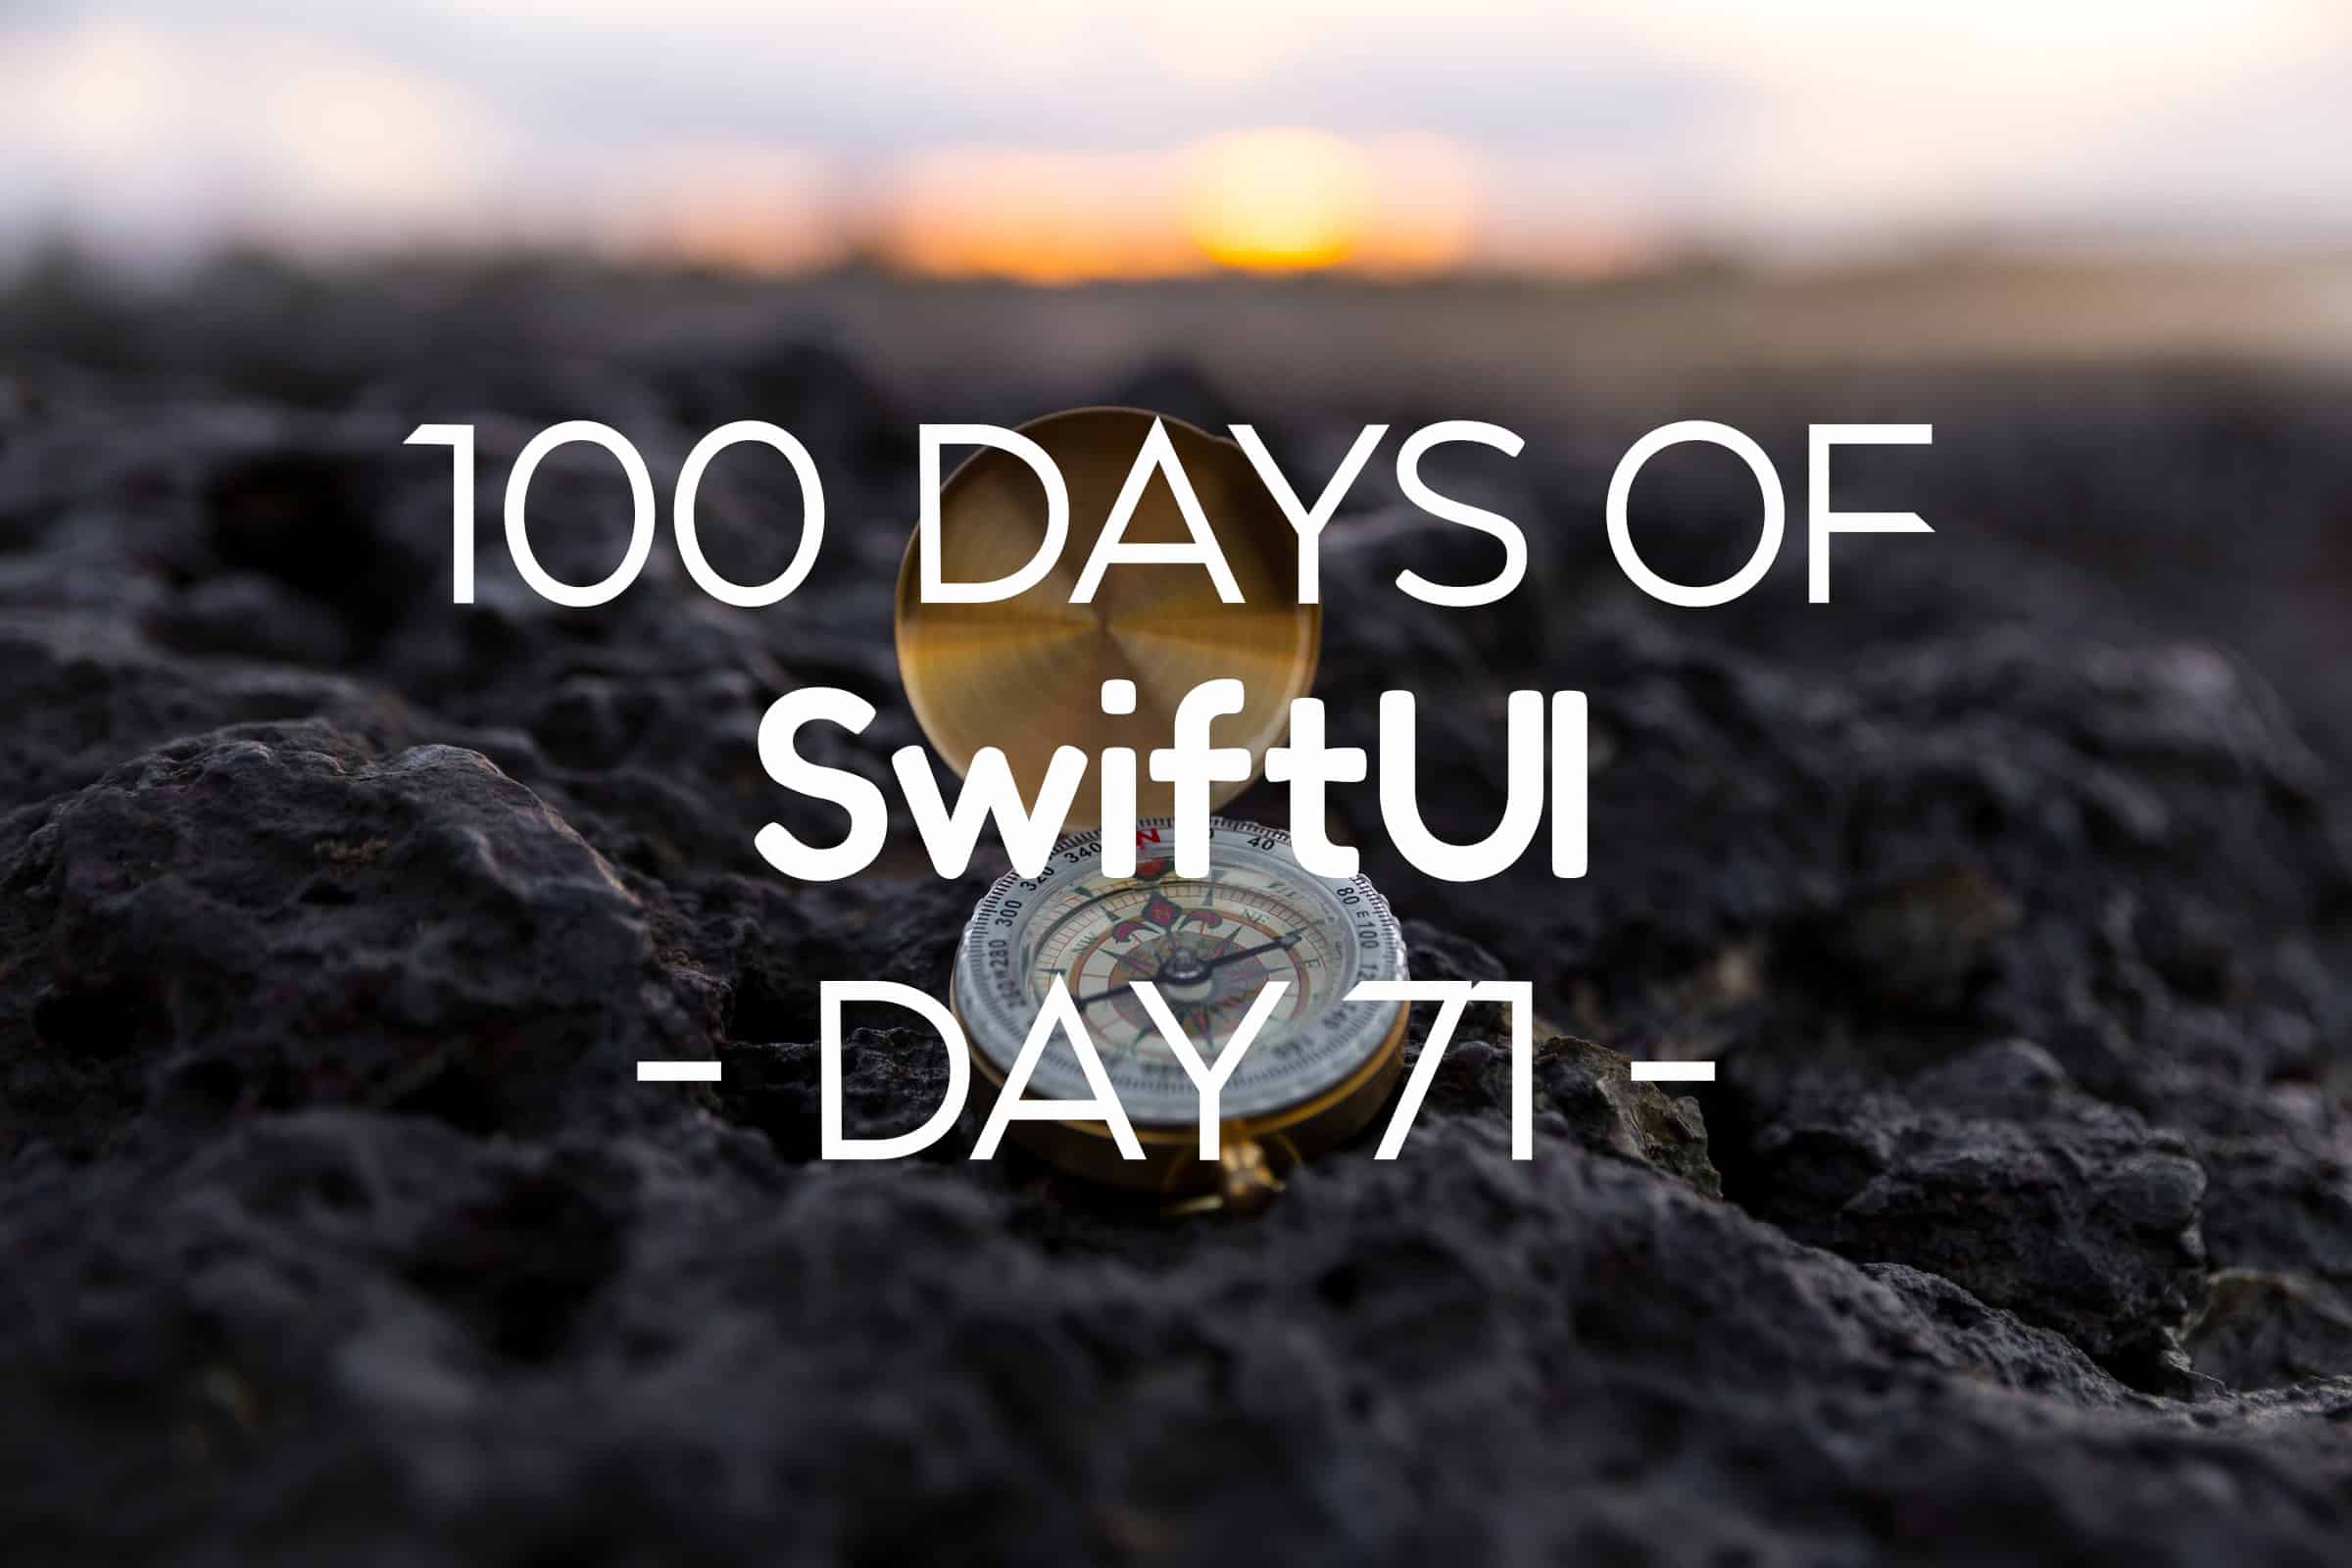 100 Days of SwiftUI Day 71